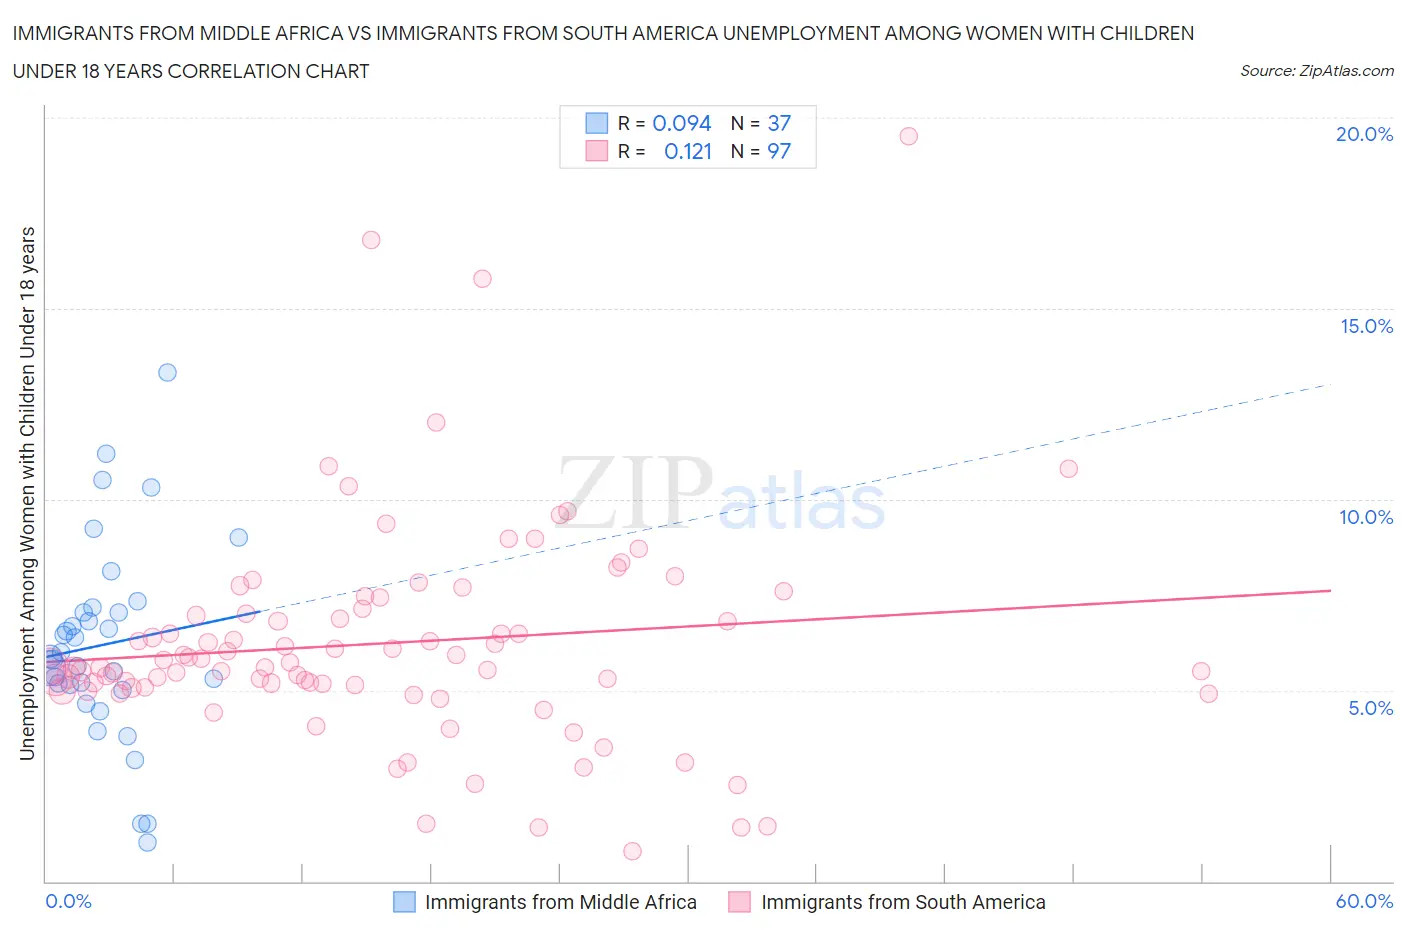 Immigrants from Middle Africa vs Immigrants from South America Unemployment Among Women with Children Under 18 years